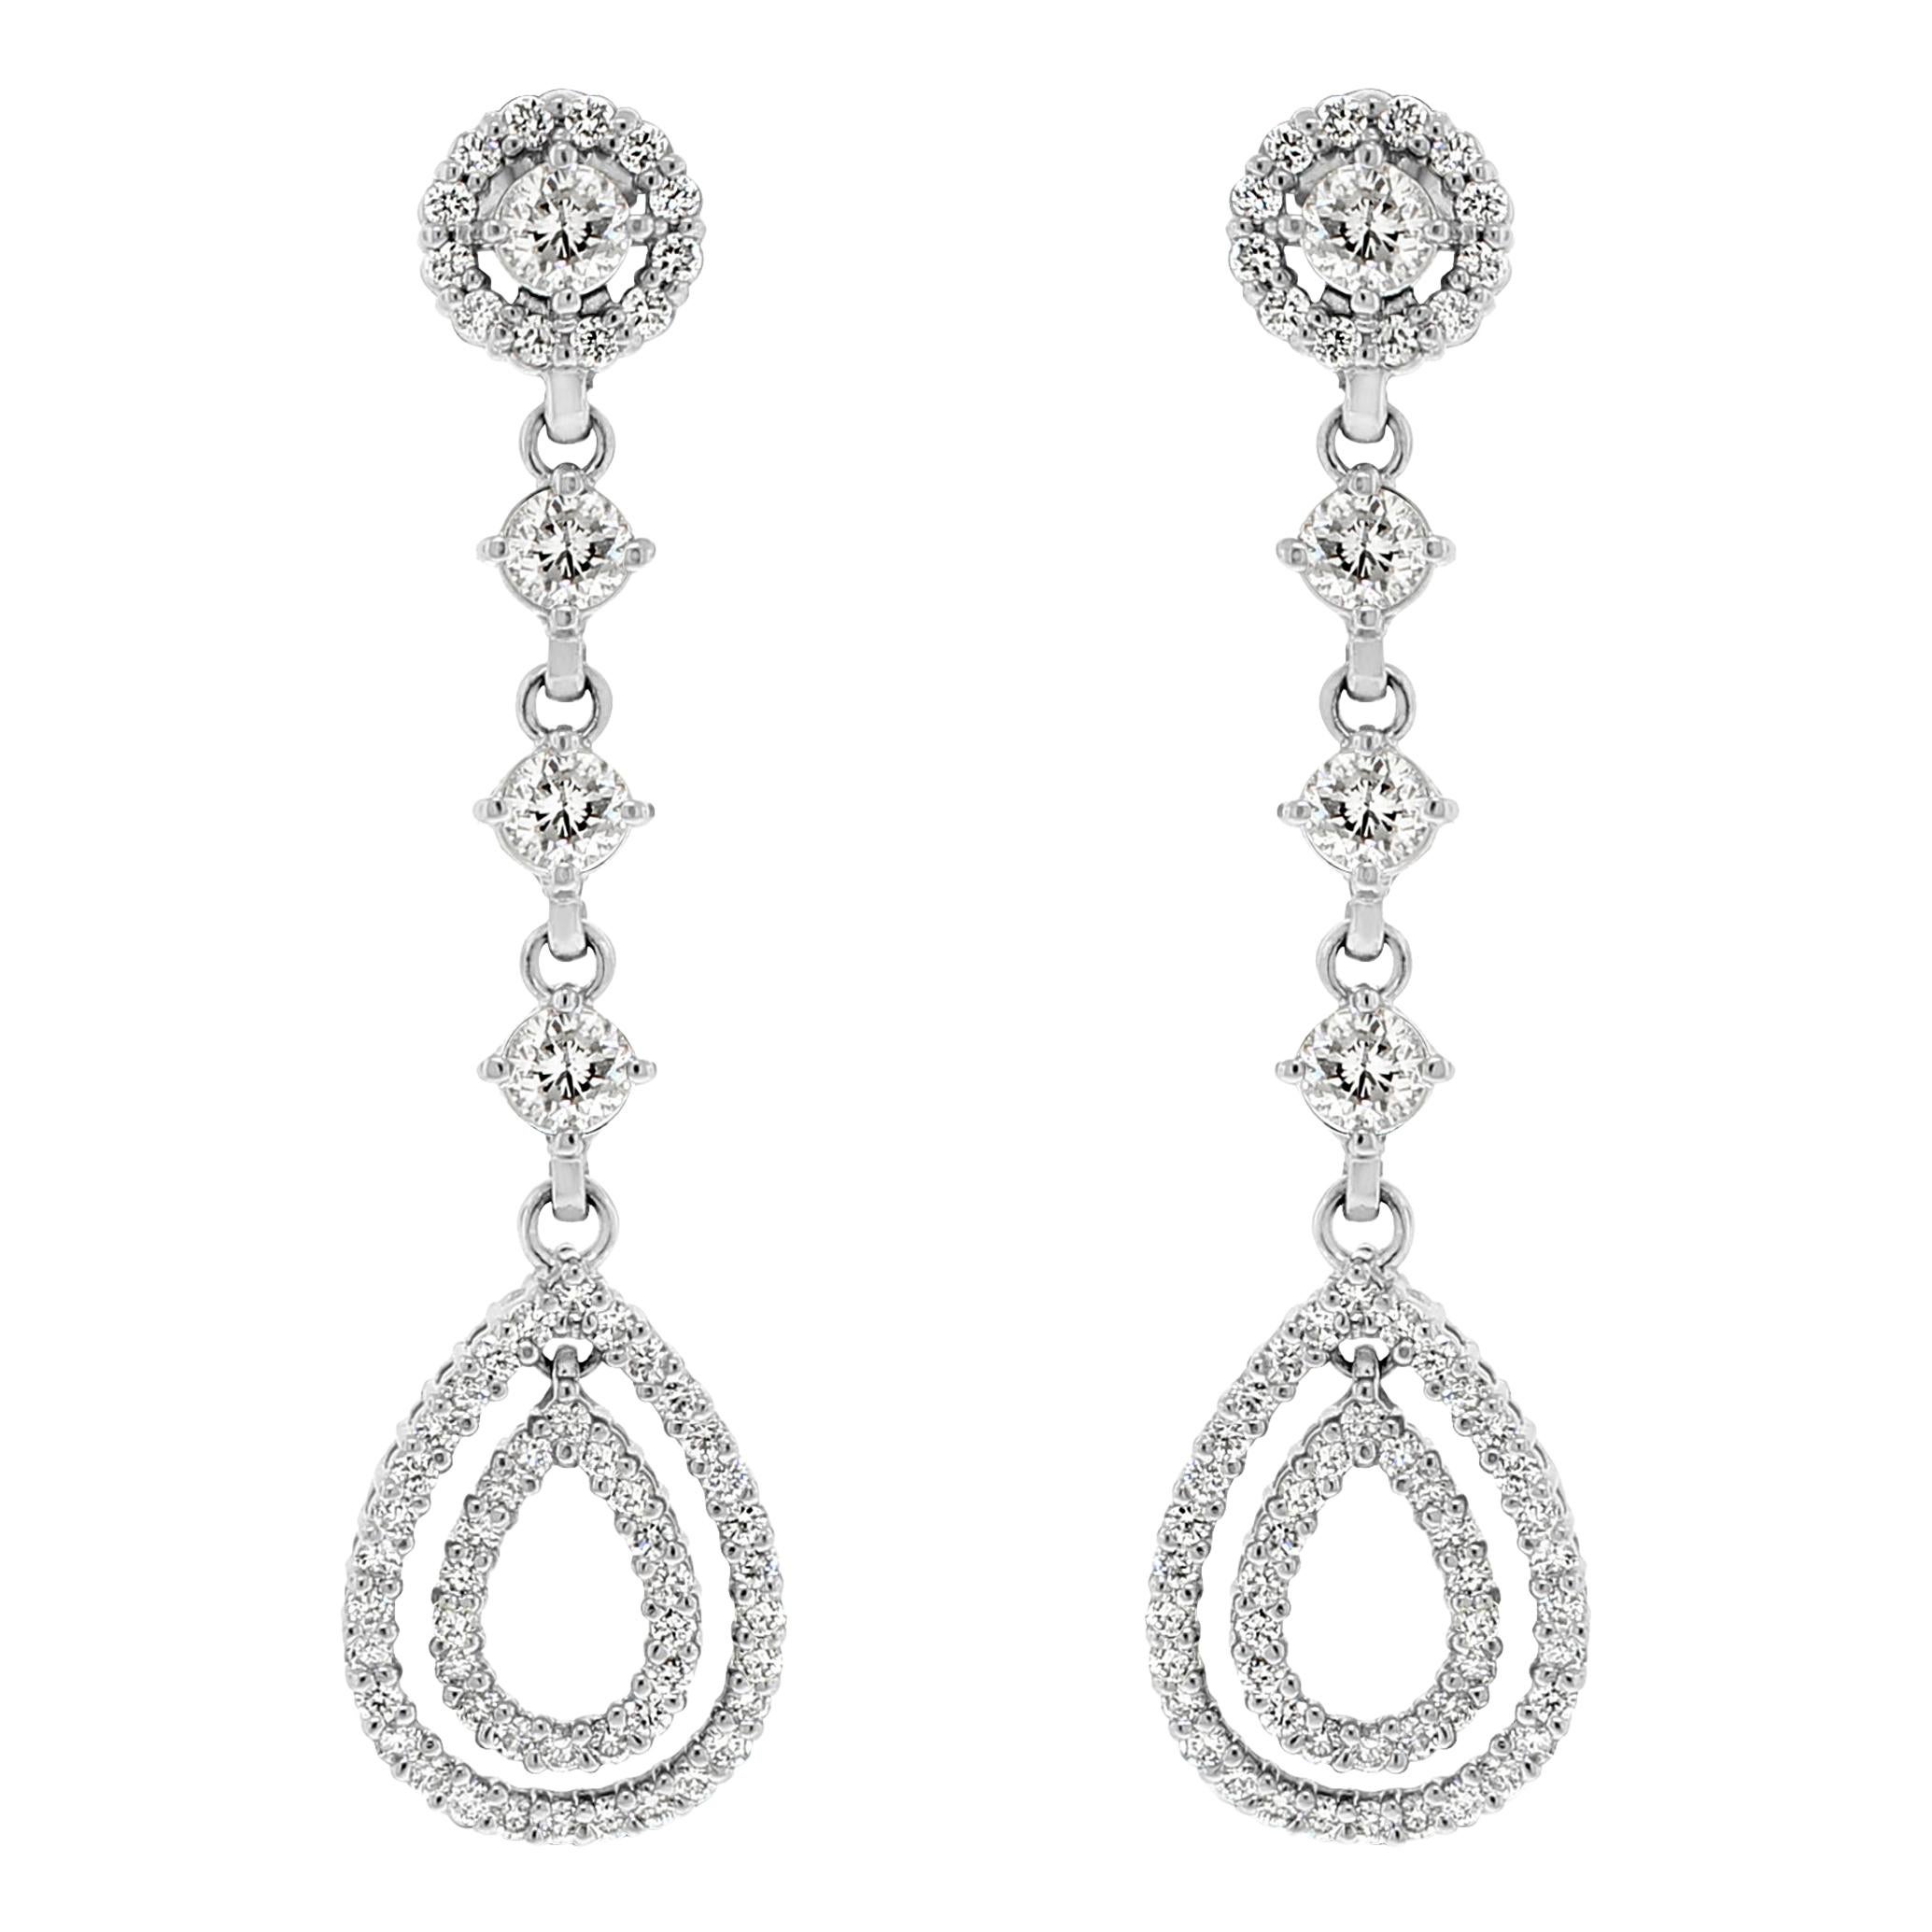 Beauvince Dangling Halo 2.02 Carat Diamond Earrings in White Gold